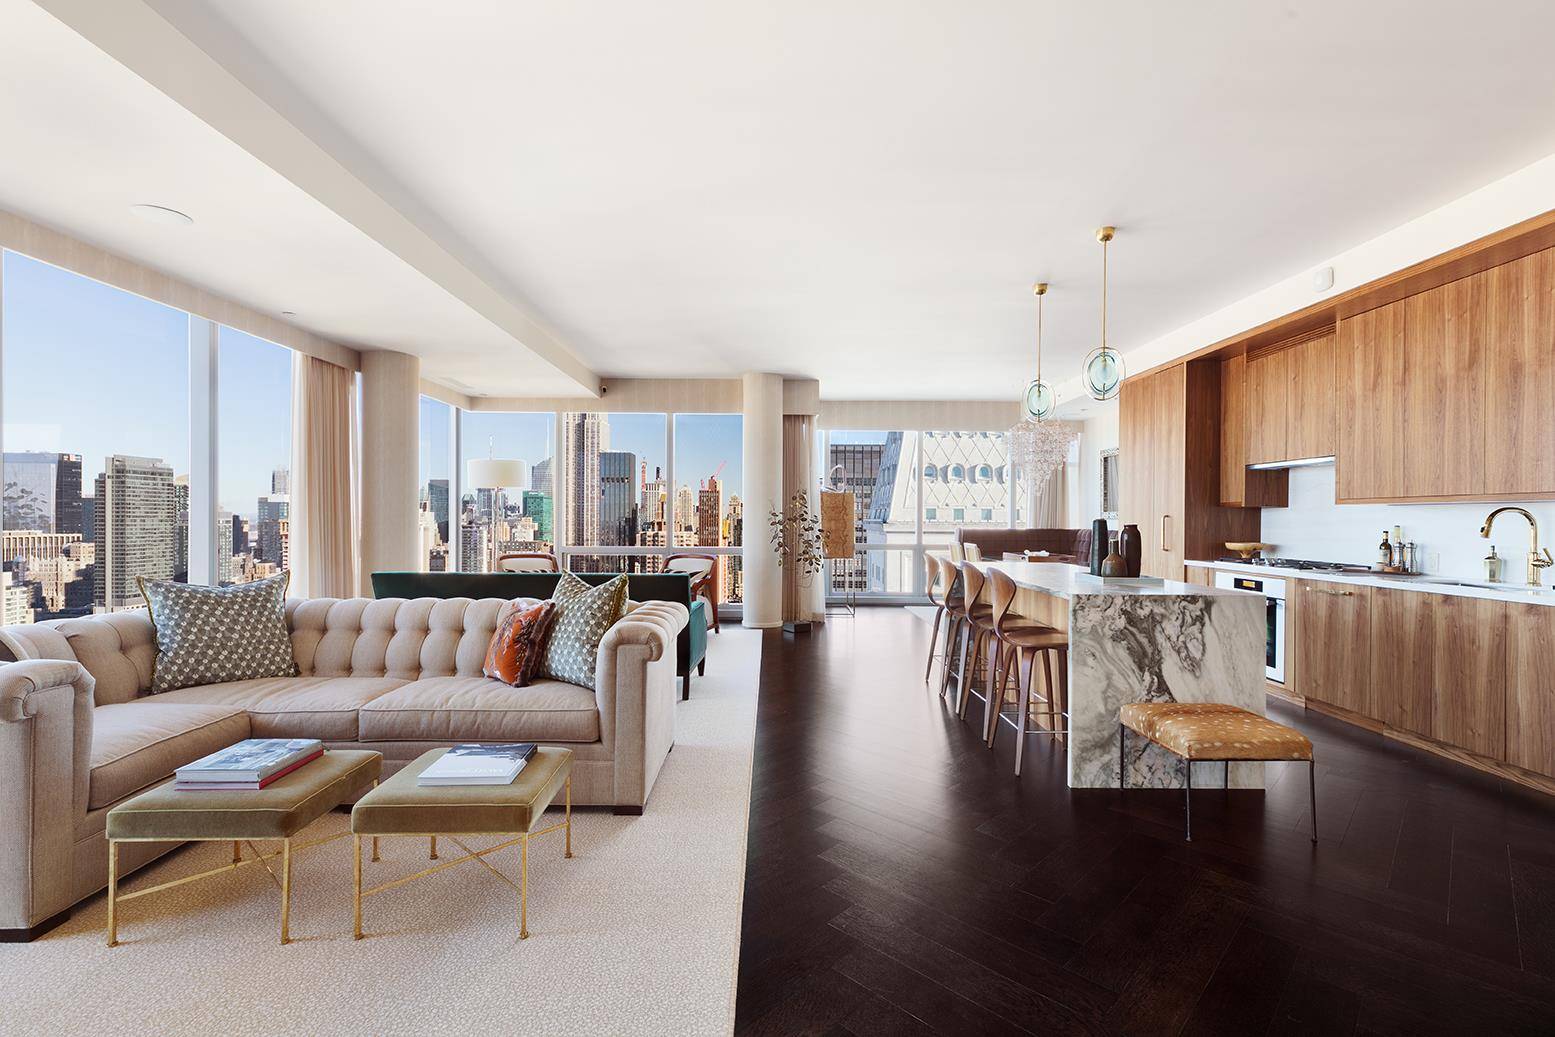 An unparalleled luxury living experience awaits you at the striking ultra modern One Madison condominium towering 60 stories over New York City.